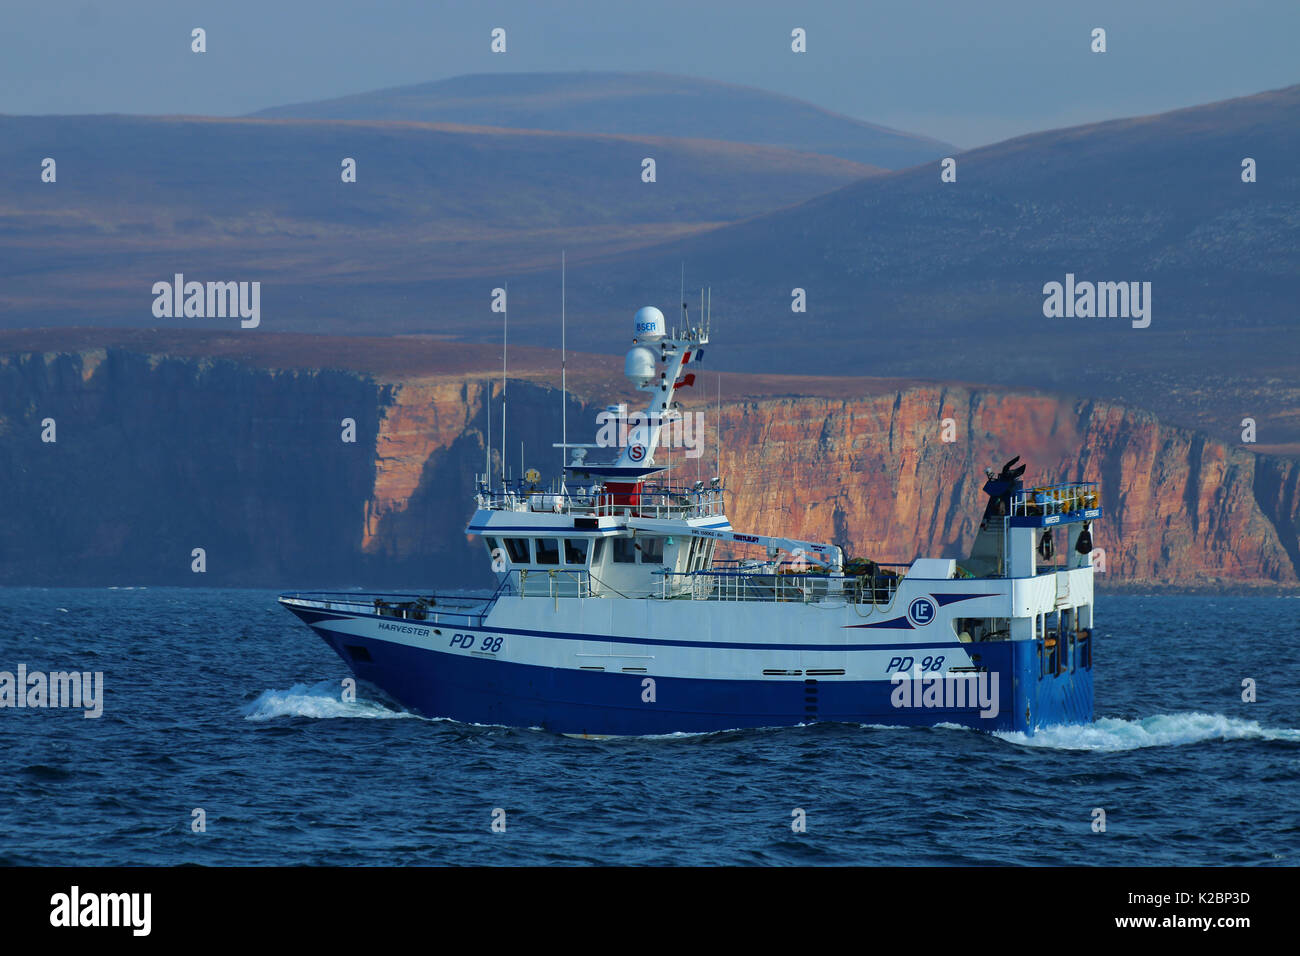 Fishing vessel 'Harvester' heading north on west side of Orkney Islands, Scotland, March 2015. Property released. Stock Photo